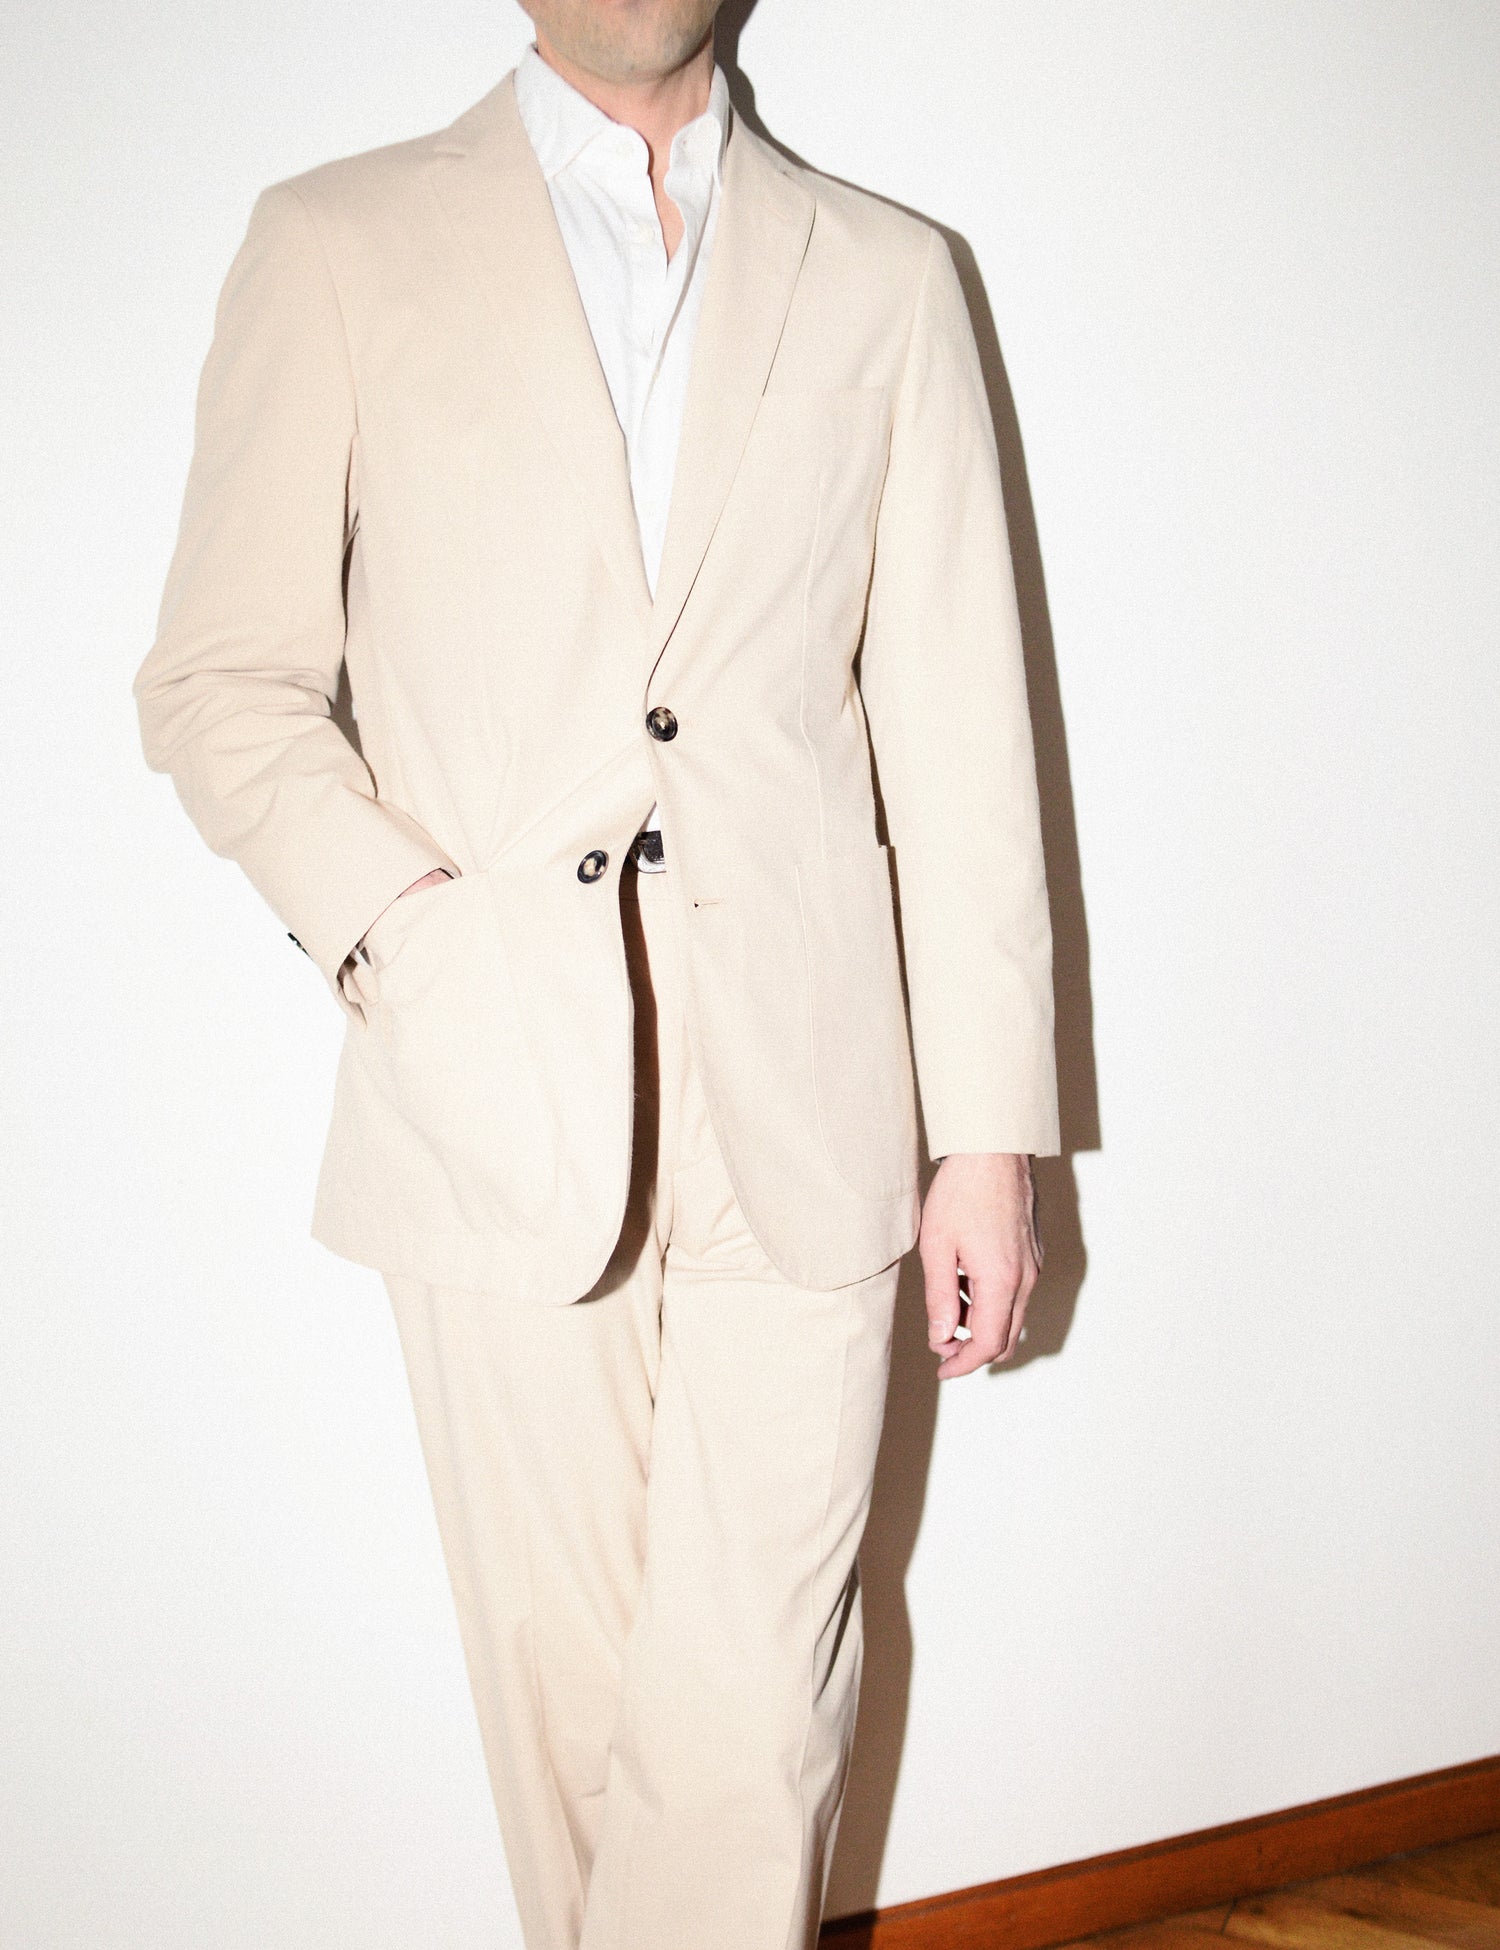 Main Homepage Image 1 of 2, featuring our Cotton / Silk Suit in color Desert Sand